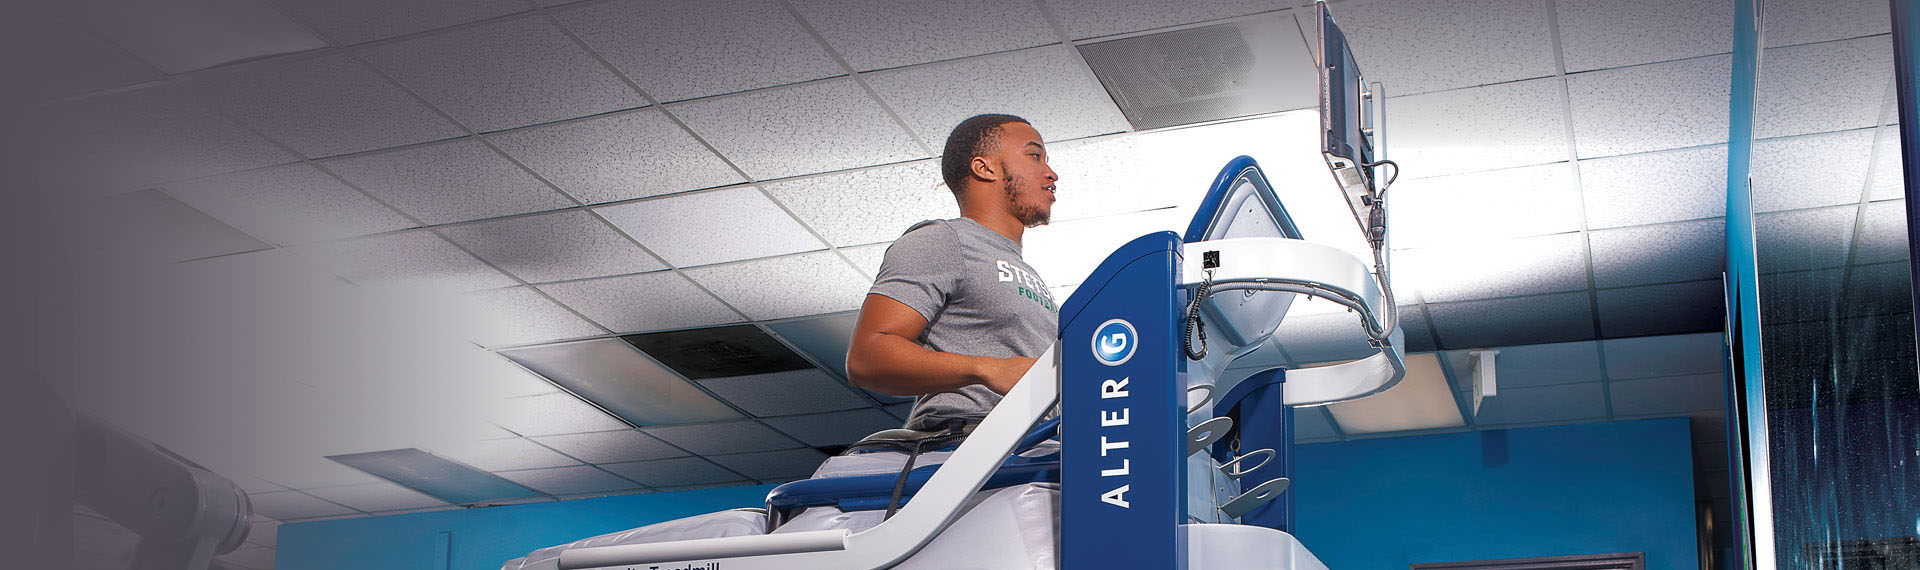 AlterG: Not Your Run-of-the-mill Treadmill￼